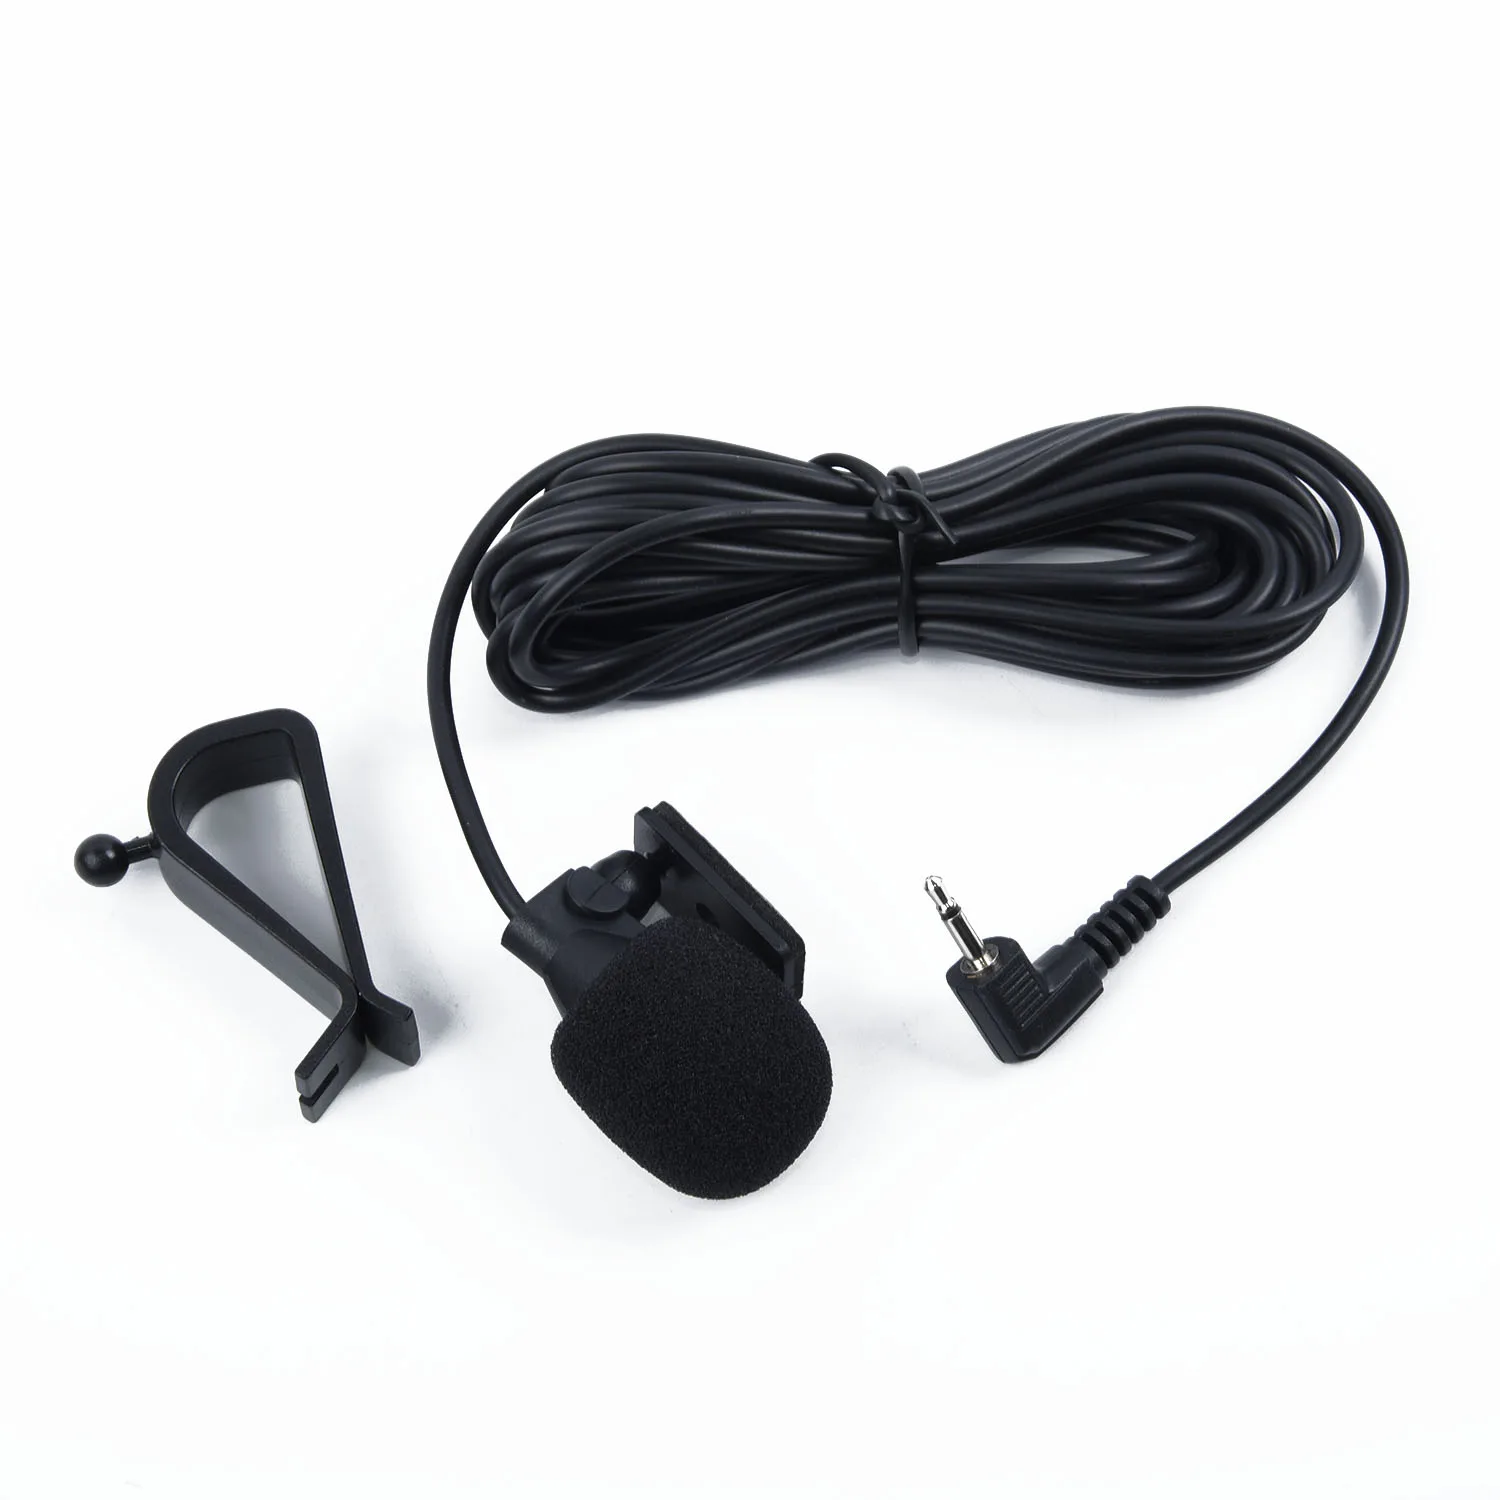 

1pc 3 Meters 2.5mm External Microphone For Car Pioneer Stereos Radio Receiver Car Audio Microphone Accessories